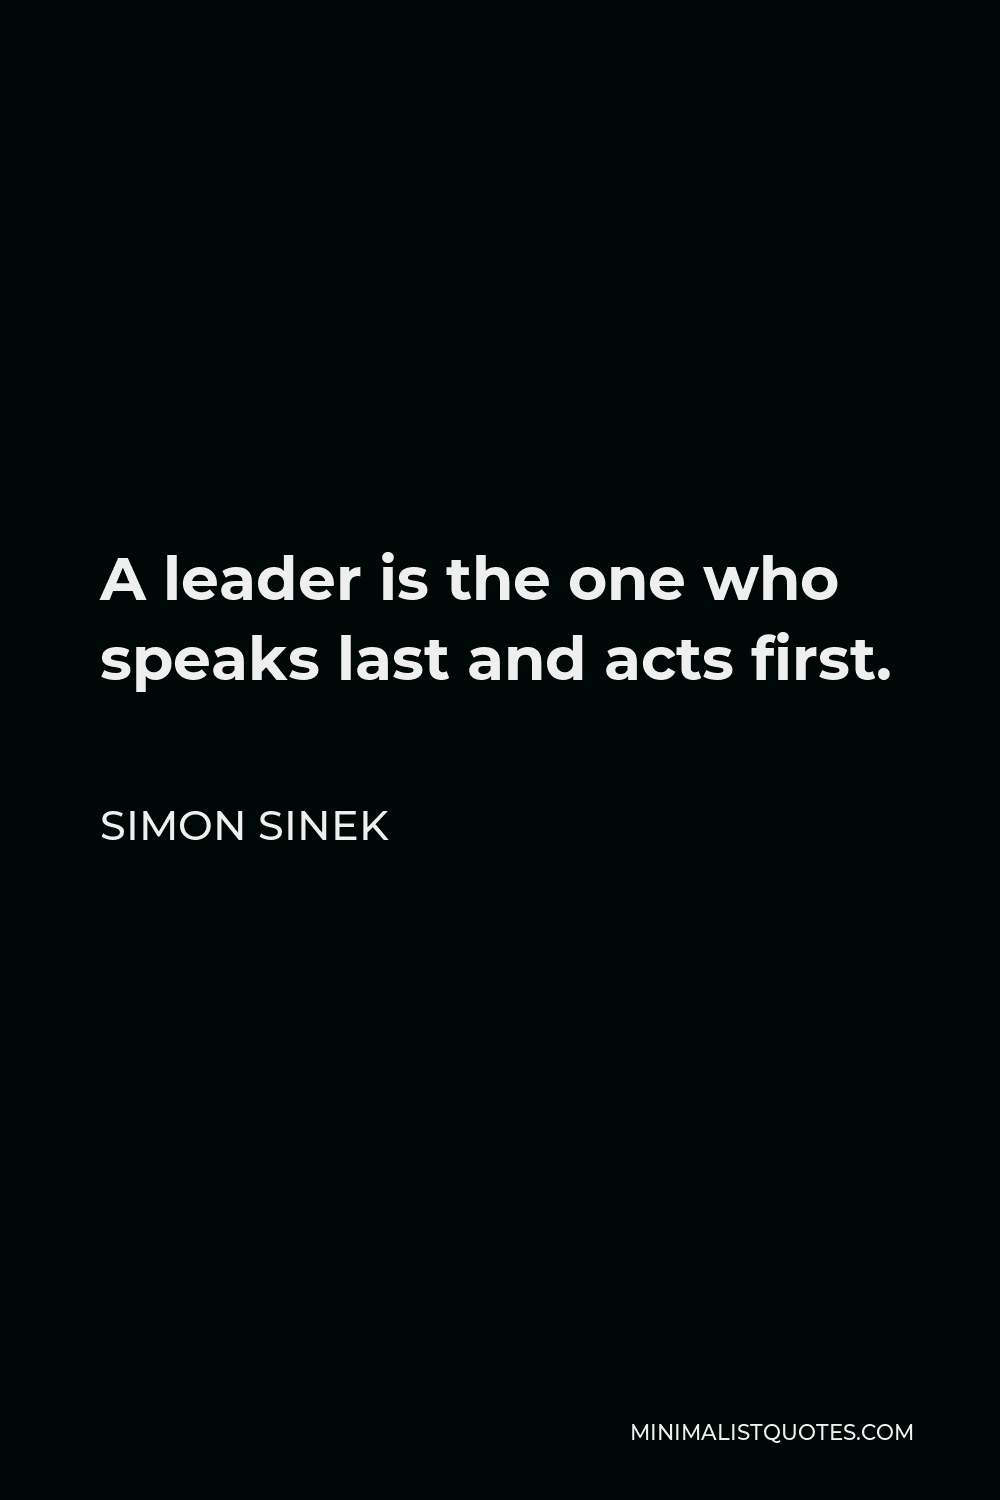 Simon Sinek Quote - A leader is the one who speaks last and acts first.